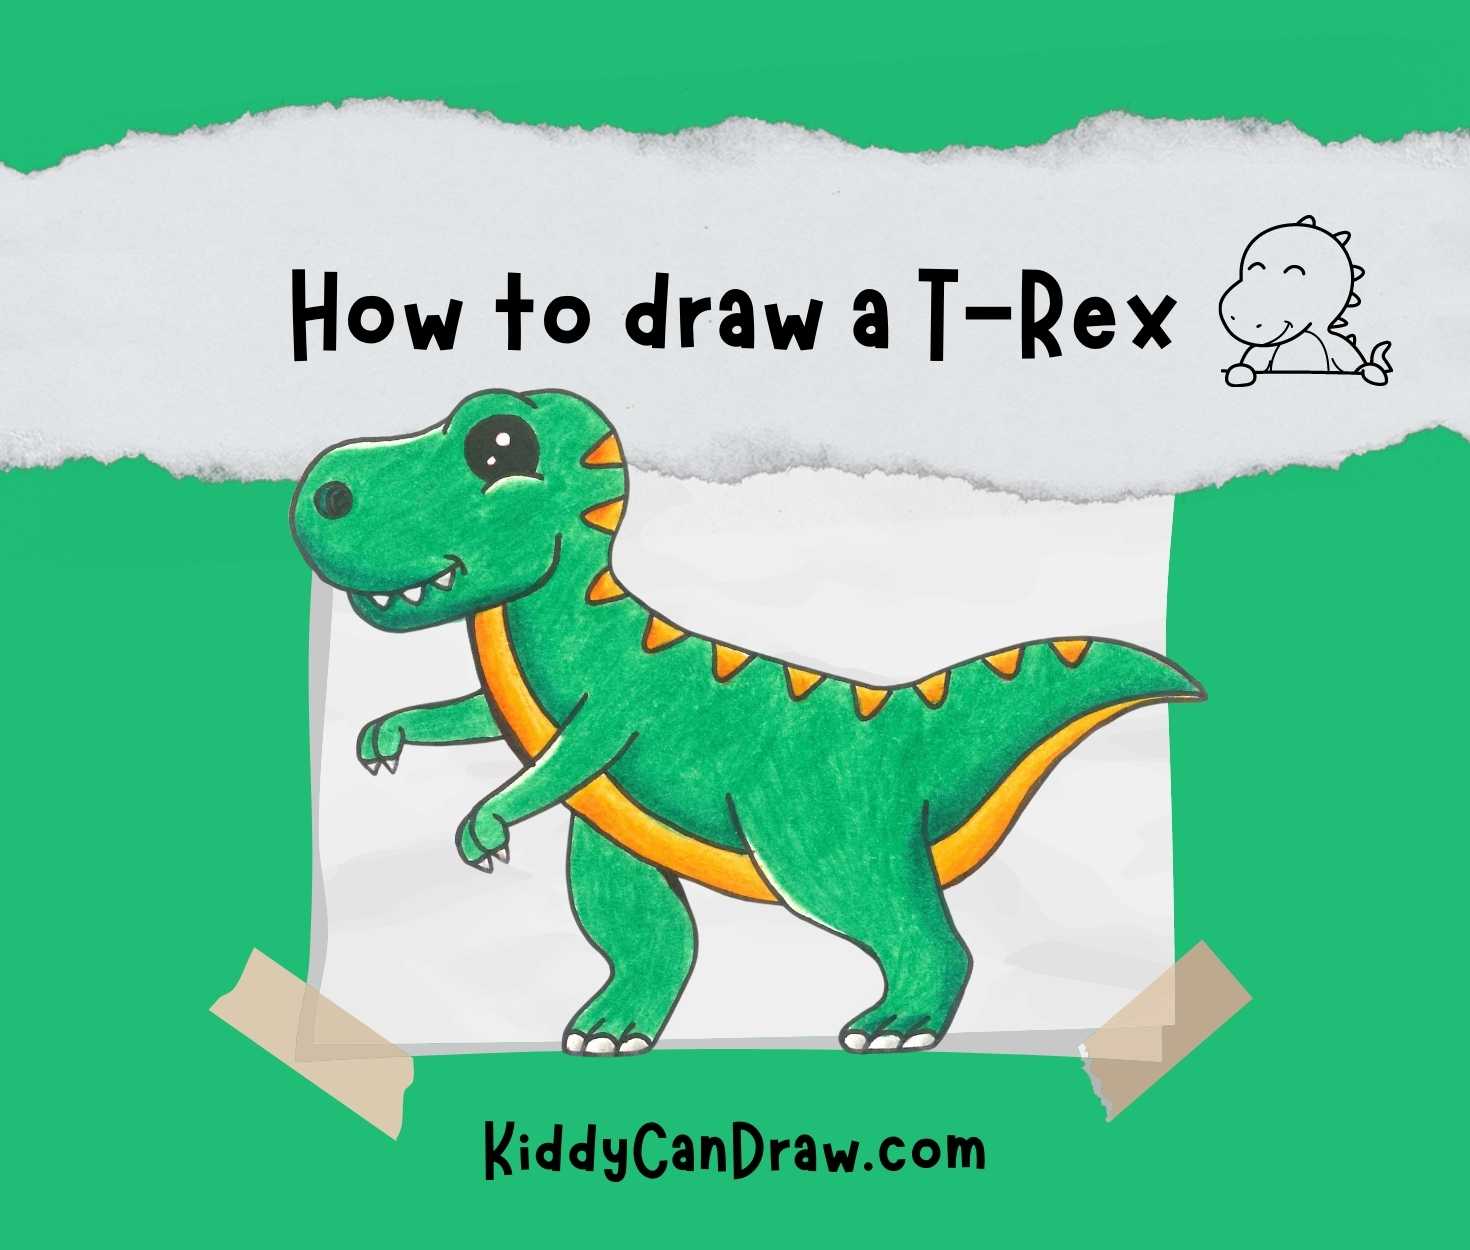 How to Draw an Easy Dinosaur for Kids - Really Easy Drawing Tutorial